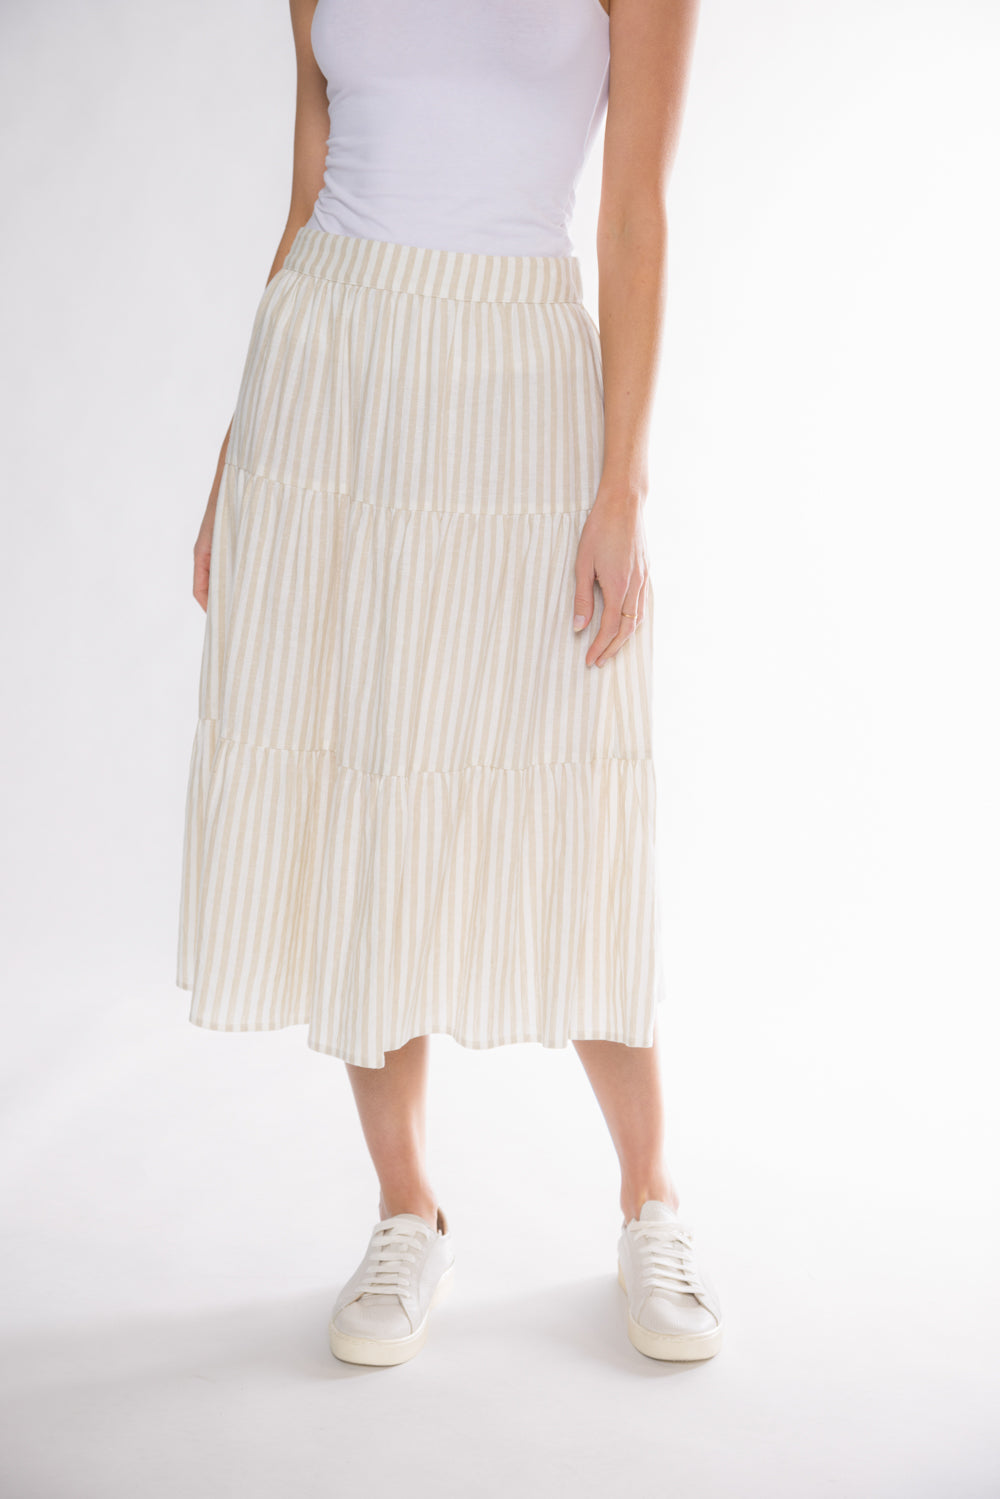 EMORY TIERED SKIRT - NATURAL